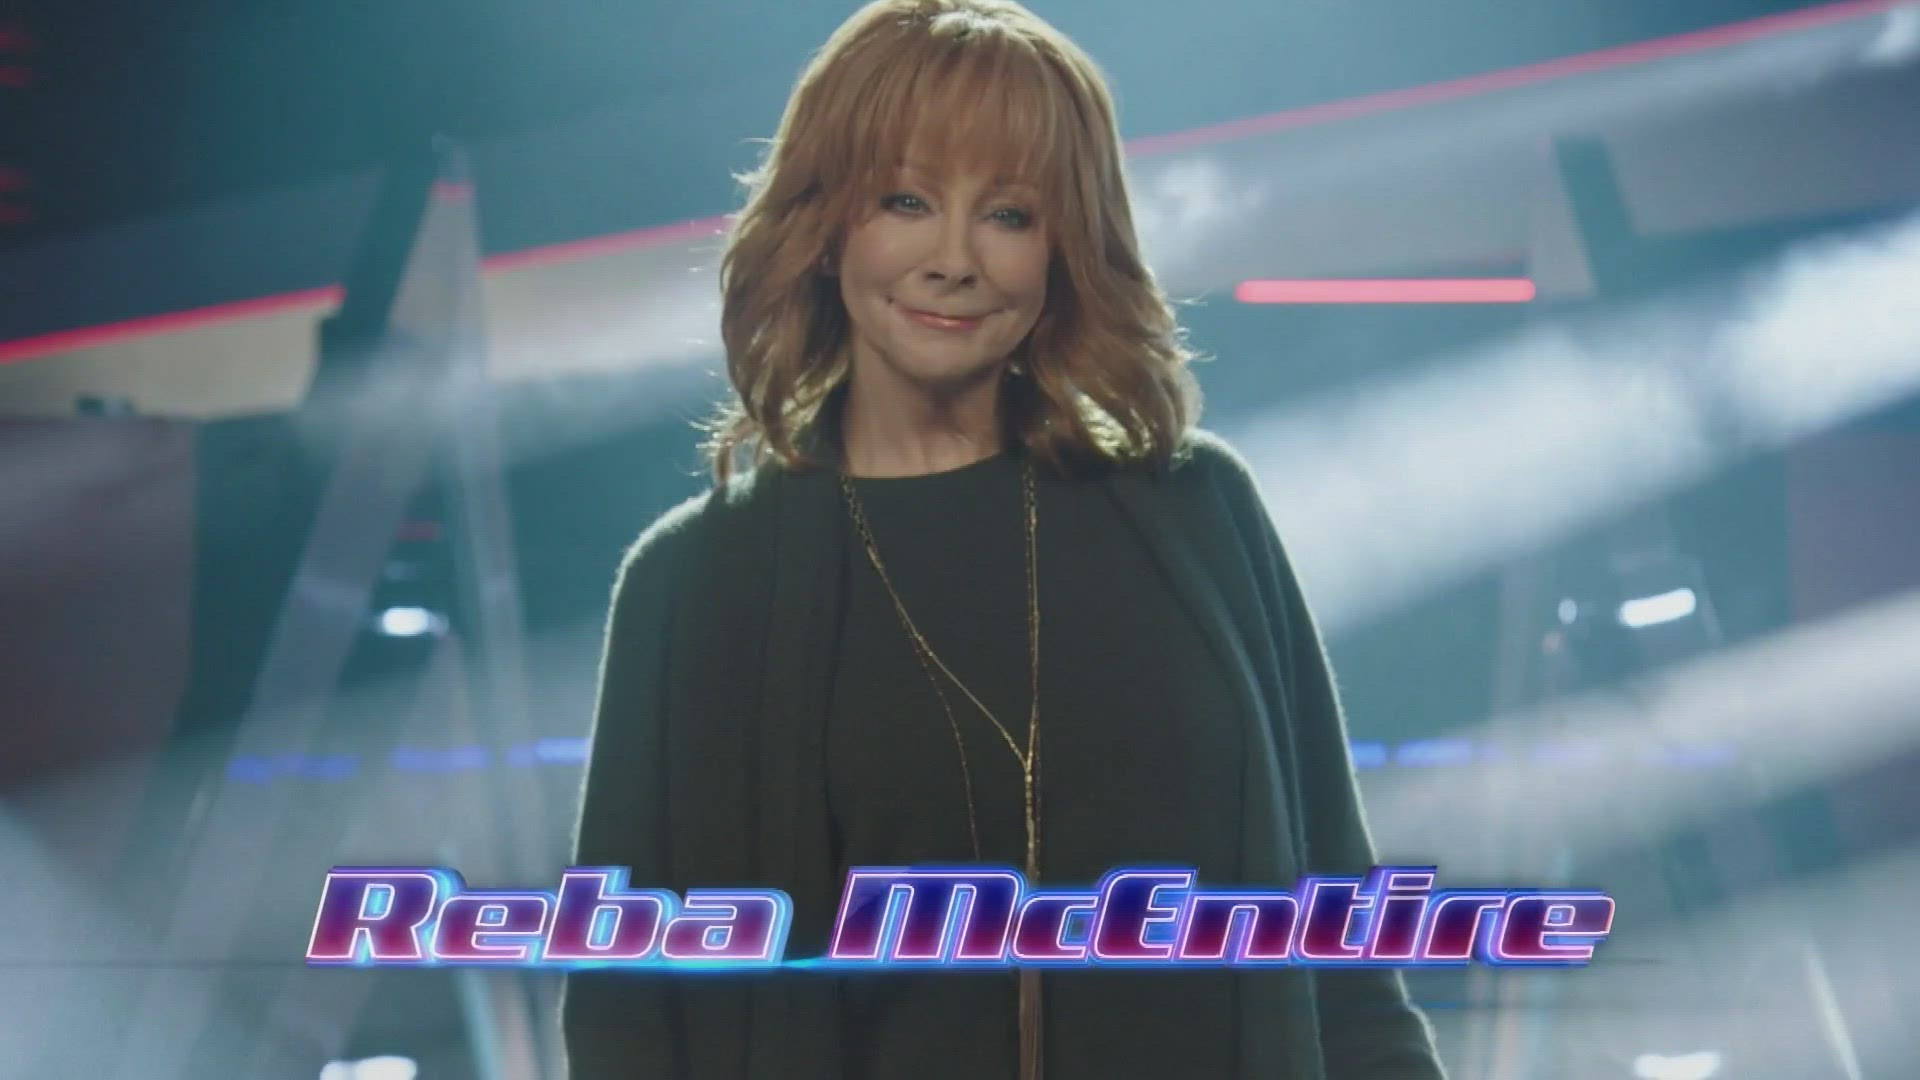 Back in 2011, Reba was Black Shelton's first ever voice mentor. Now she is back for tonight's knockout rounds, helping all the coaches.